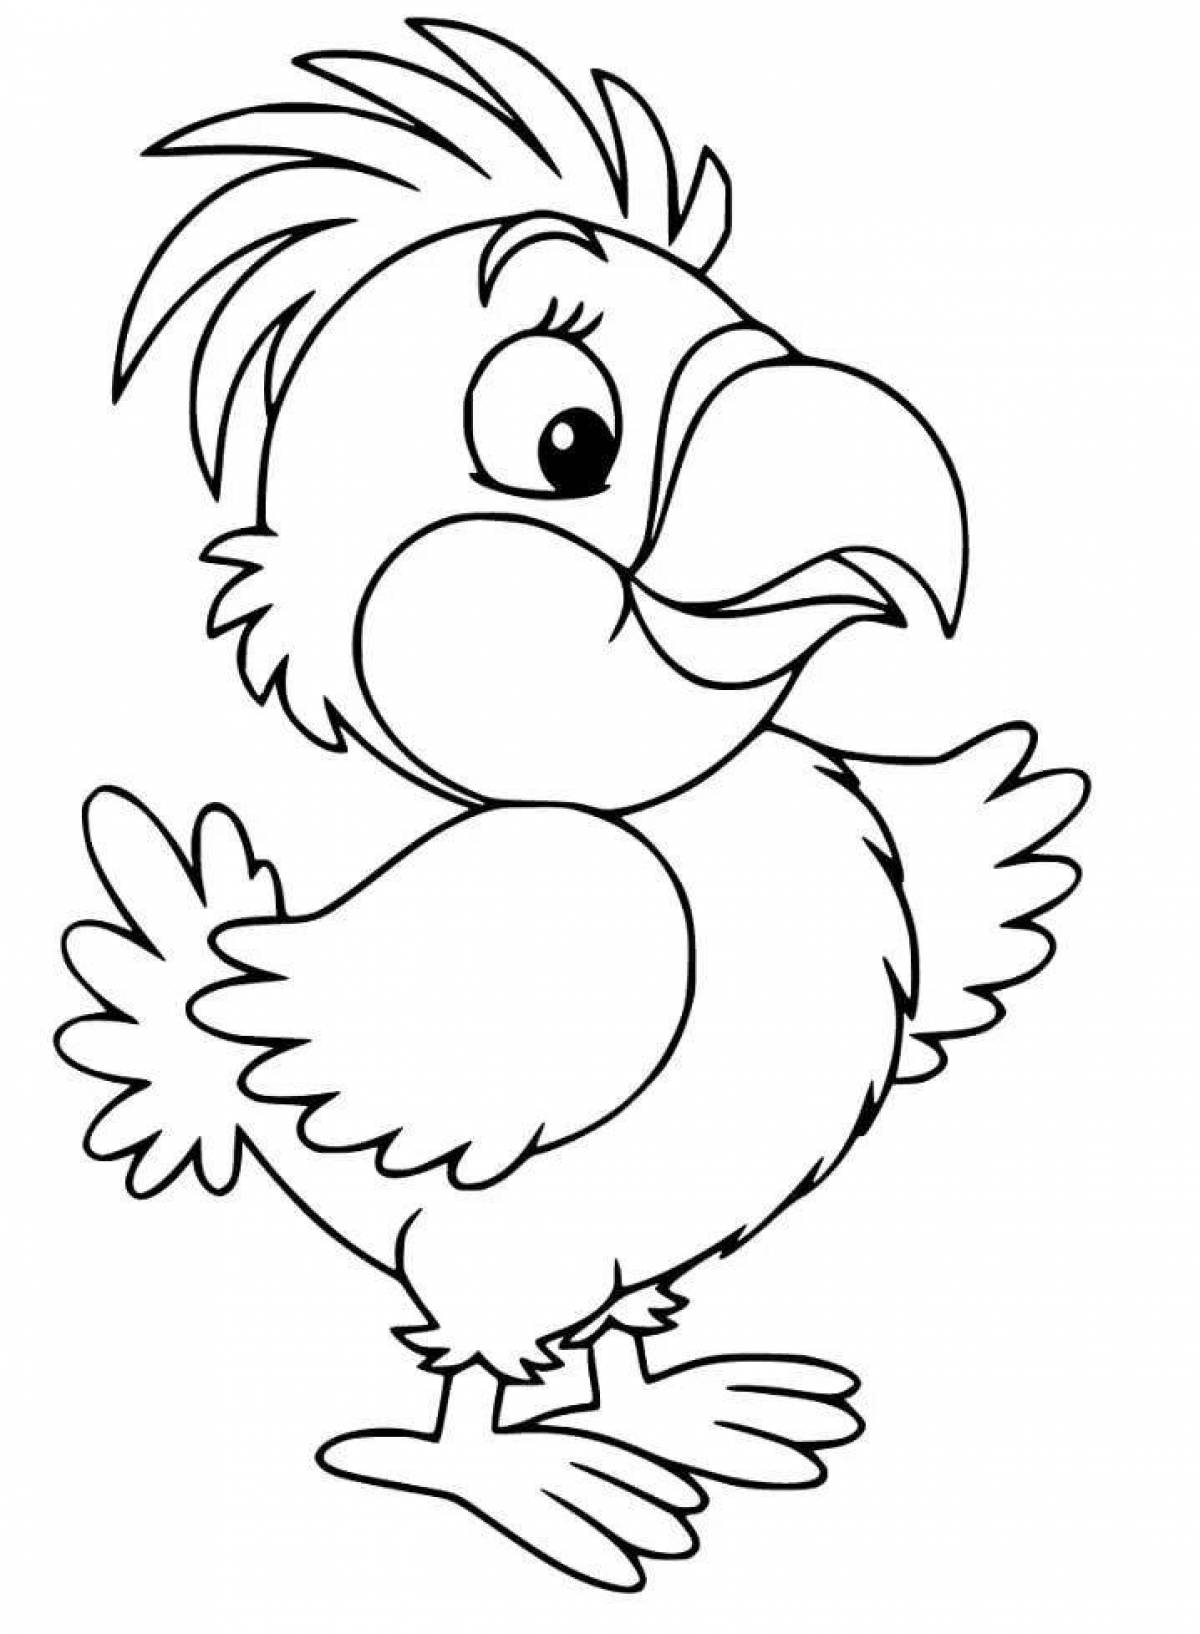 Animated parrot coloring page for kids